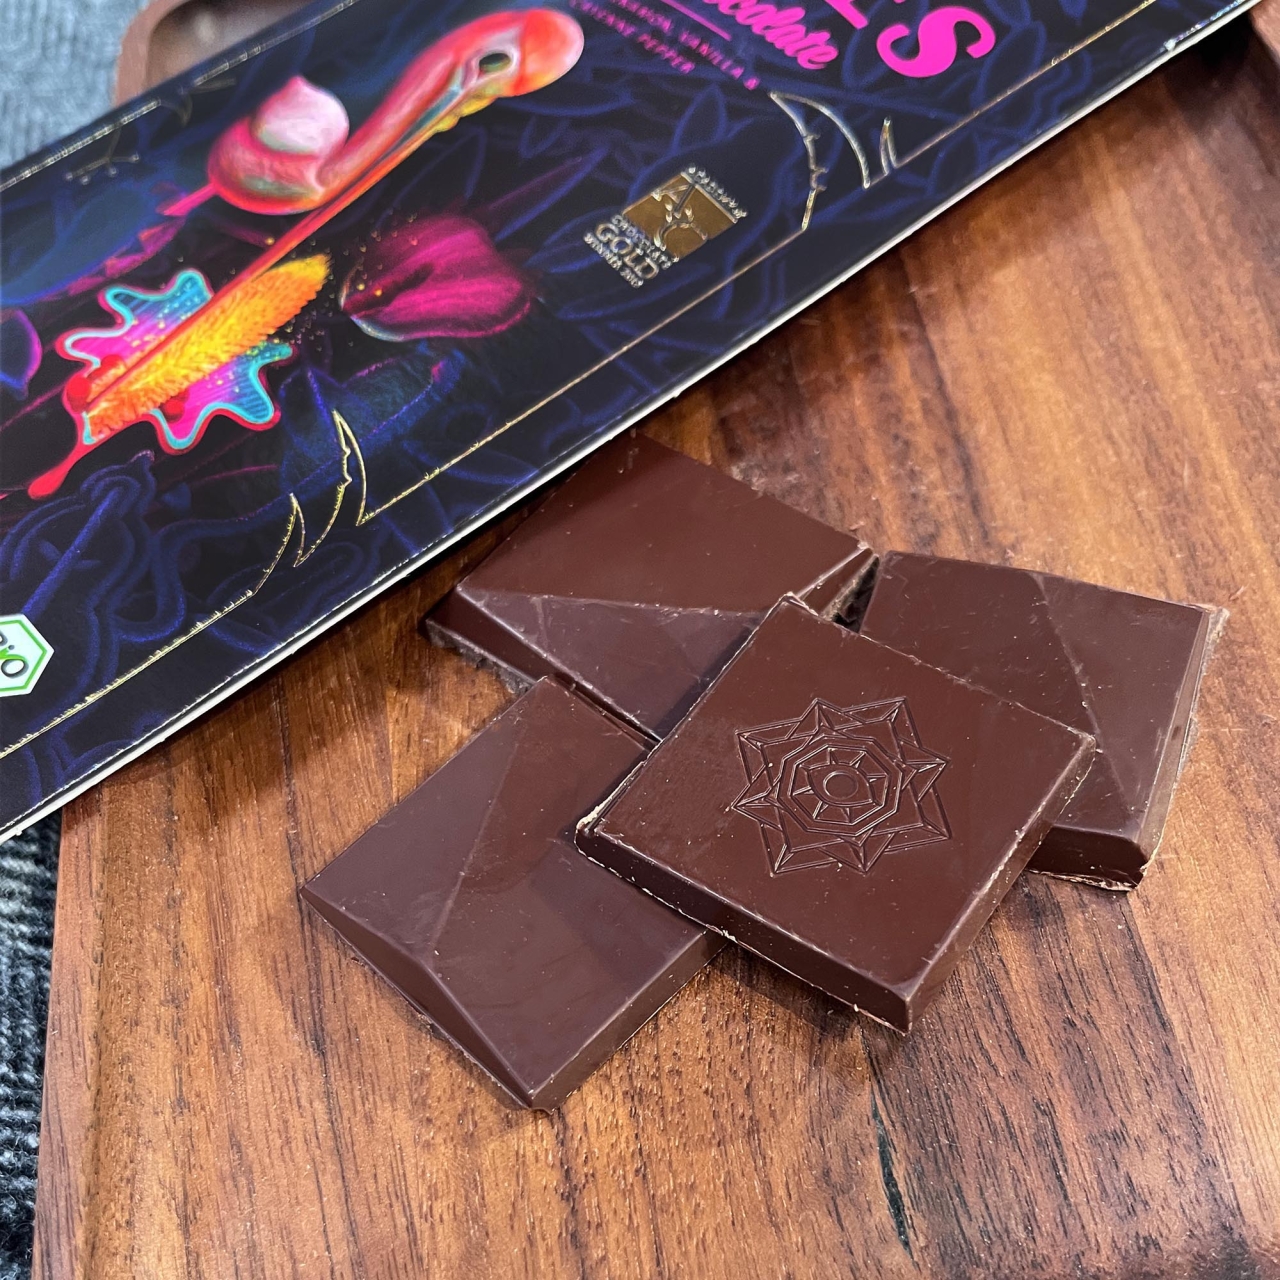 Mulate Spices Chocolate